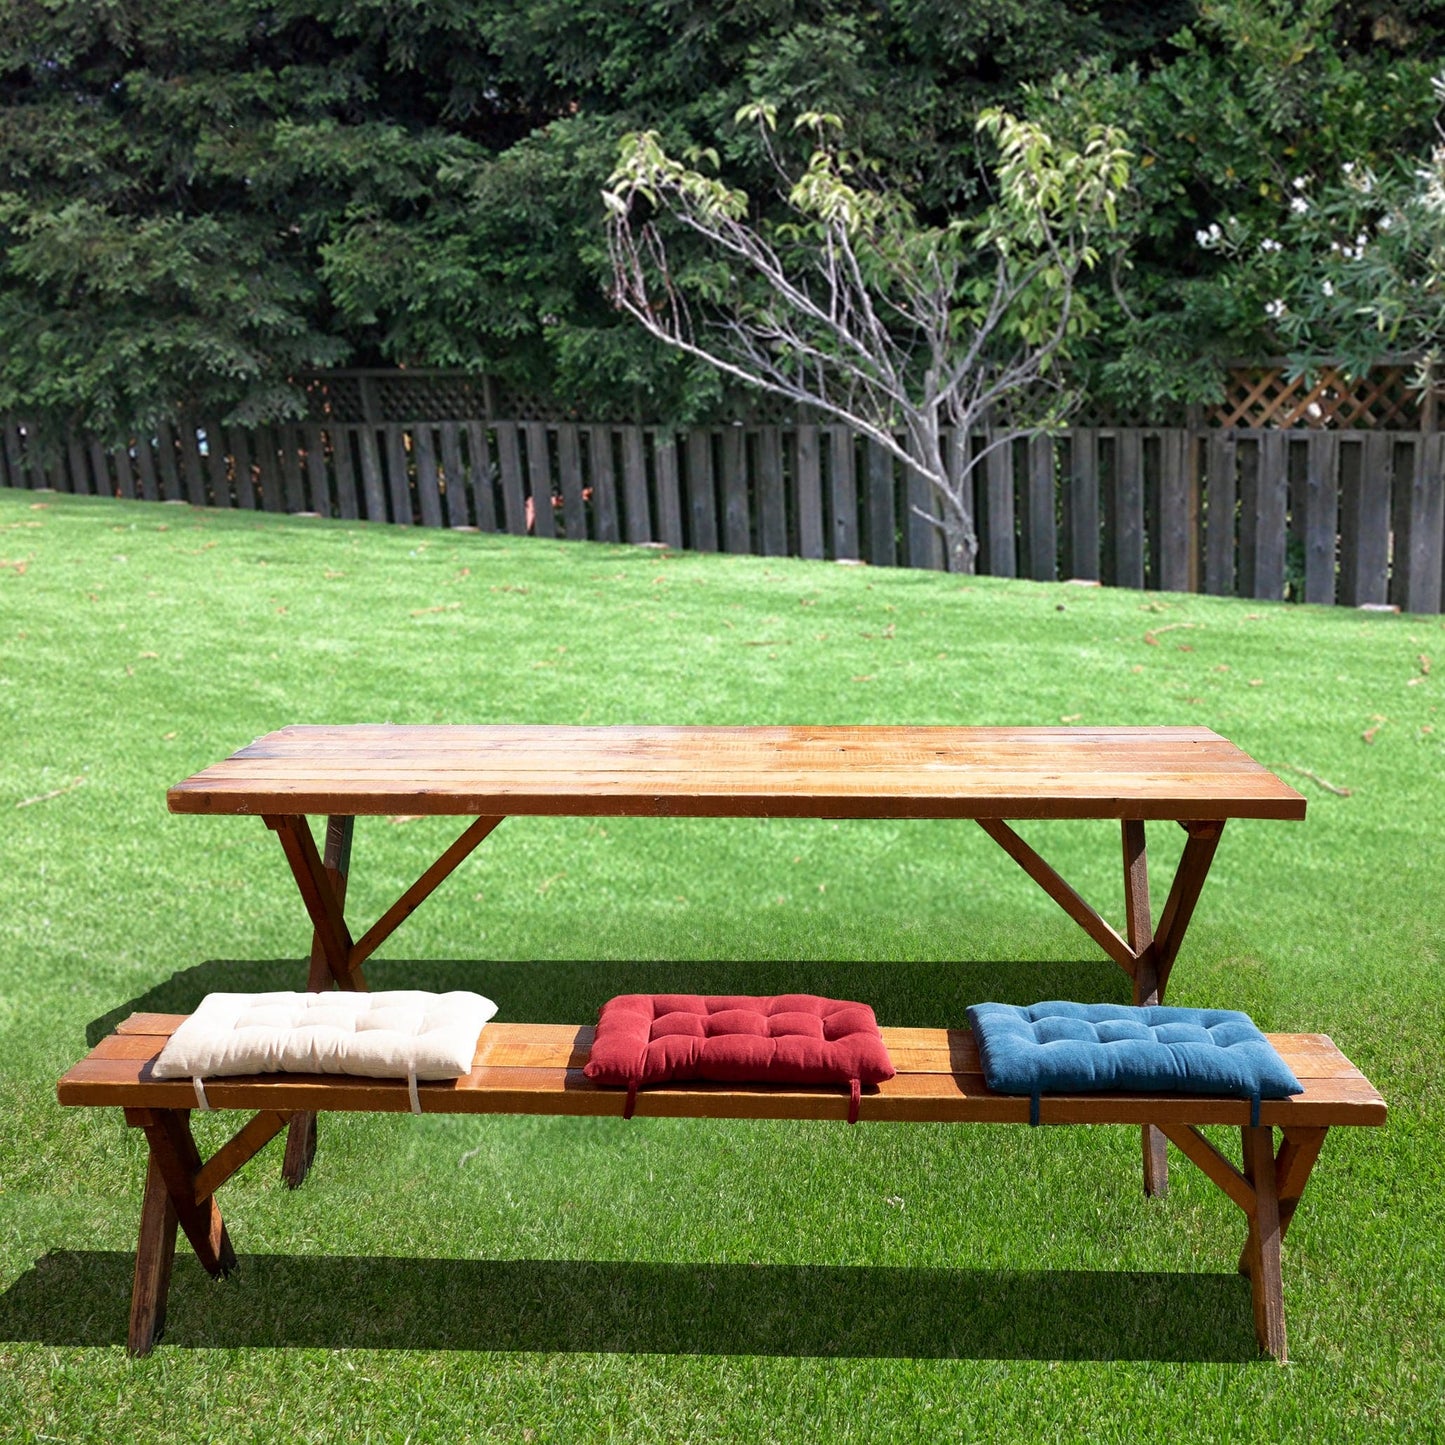 Ticking Stripe PicNic Bench Cushions - Indoor